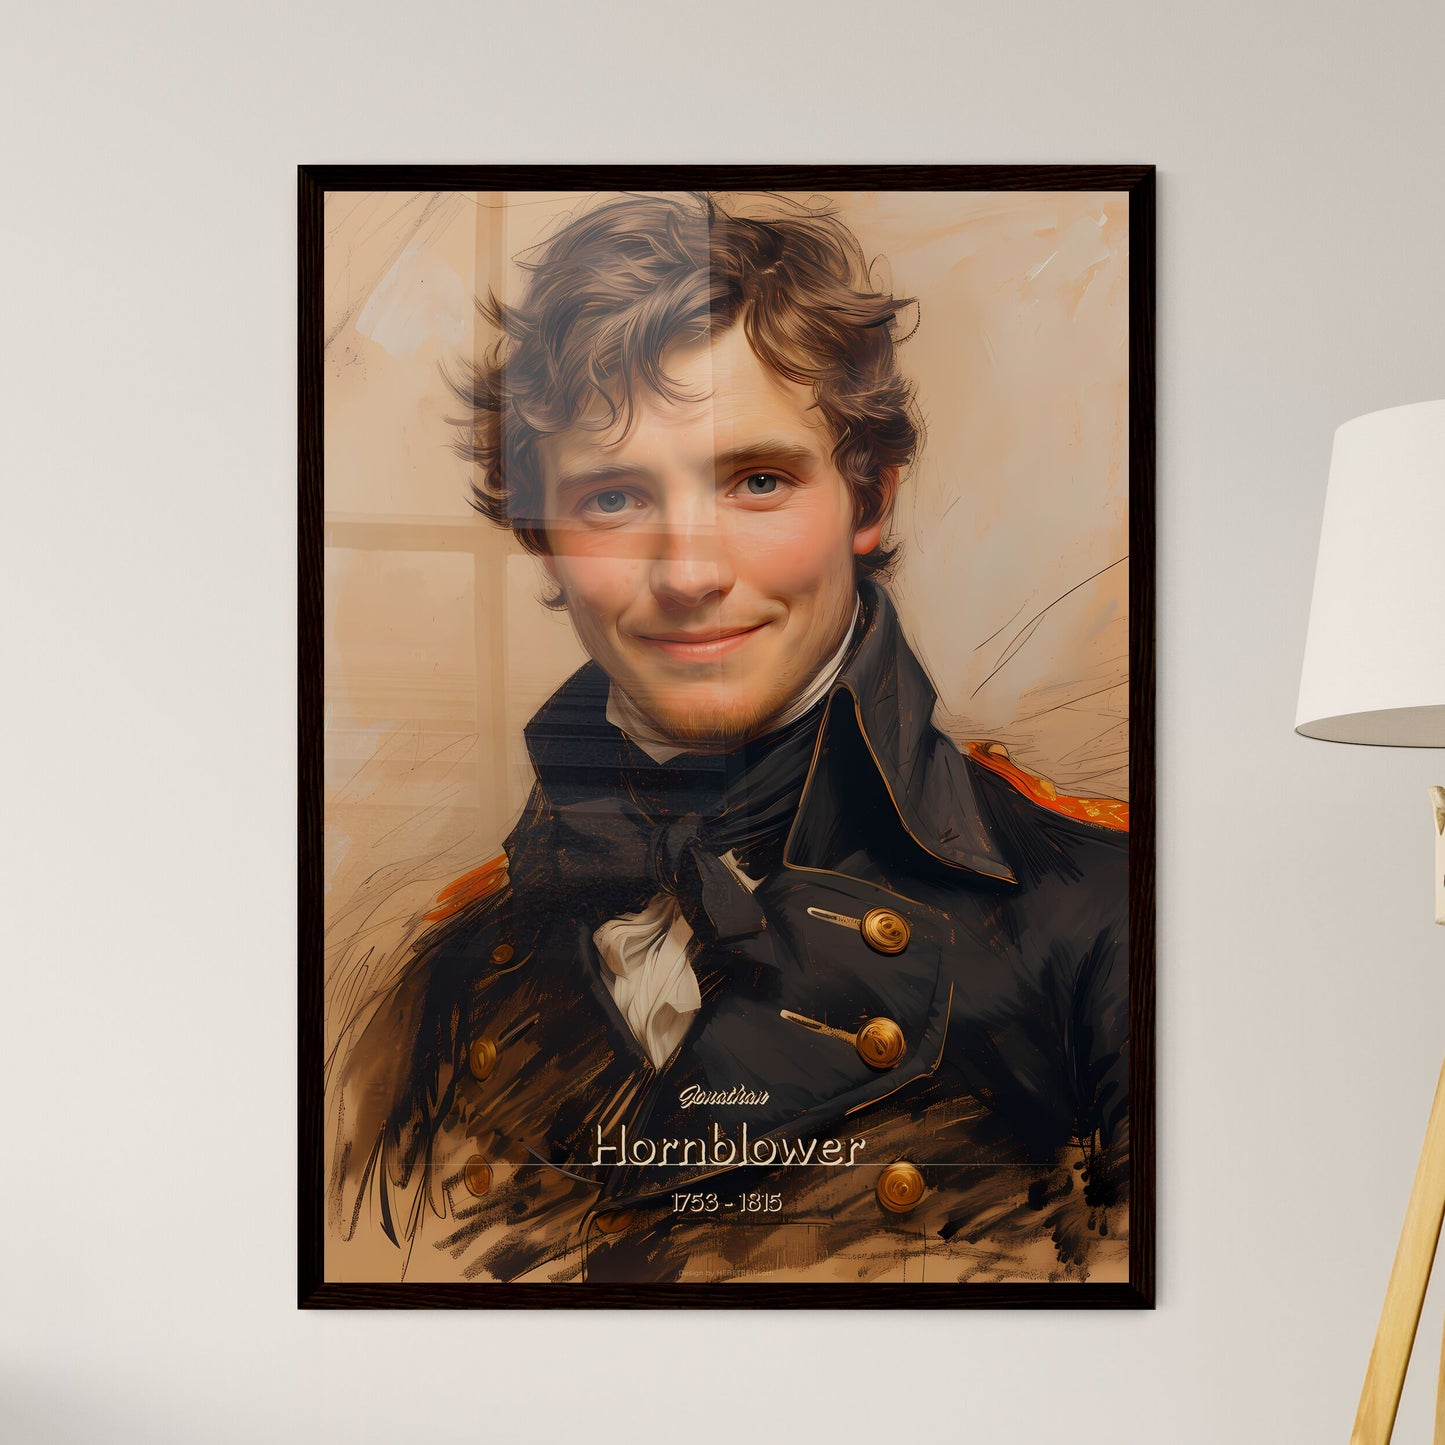 Jonathan, Hornblower, 1753 - 1815, A Poster of a man in a military uniform Default Title